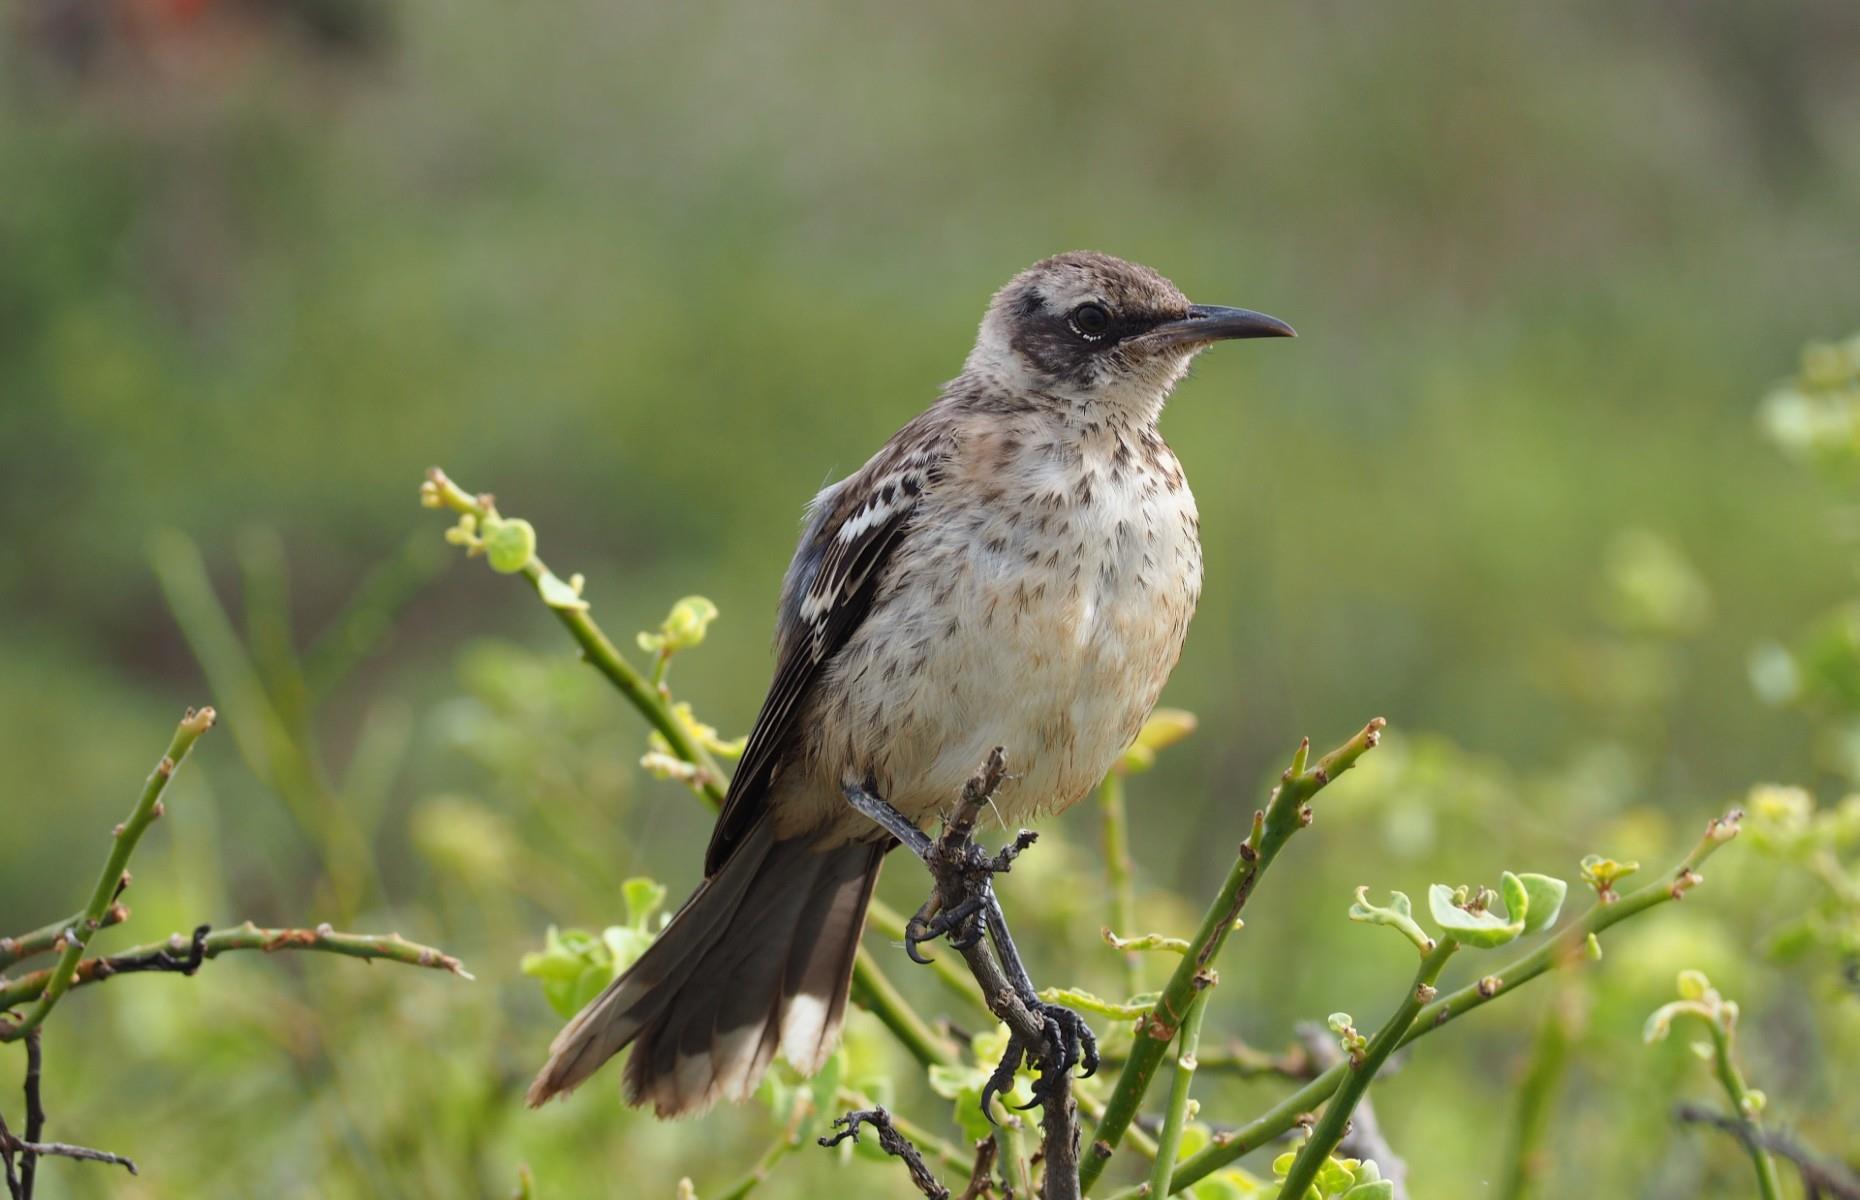 <p>In 1835, the islands were visited by British naturalist Charles Darwin as part of a five-year mission to take longitudinal measurements of the globe. But, noticing how certain species (including Darwin’s finches, pictured) varied from island to island, Darwin began to theorize that the animals had adapted to their unique environments. These observations would later form the basis for his theory of natural selection, found in <em>On the Origin of Species</em> (1859), and are one of the reasons why the isles are so famous today.</p>  <p><a href="https://www.facebook.com/loveexploringUK?utm_source=msn&utm_medium=social&utm_campaign=front"><strong>Love this? Follow our Facebook page for more travel inspiration</strong></a></p>